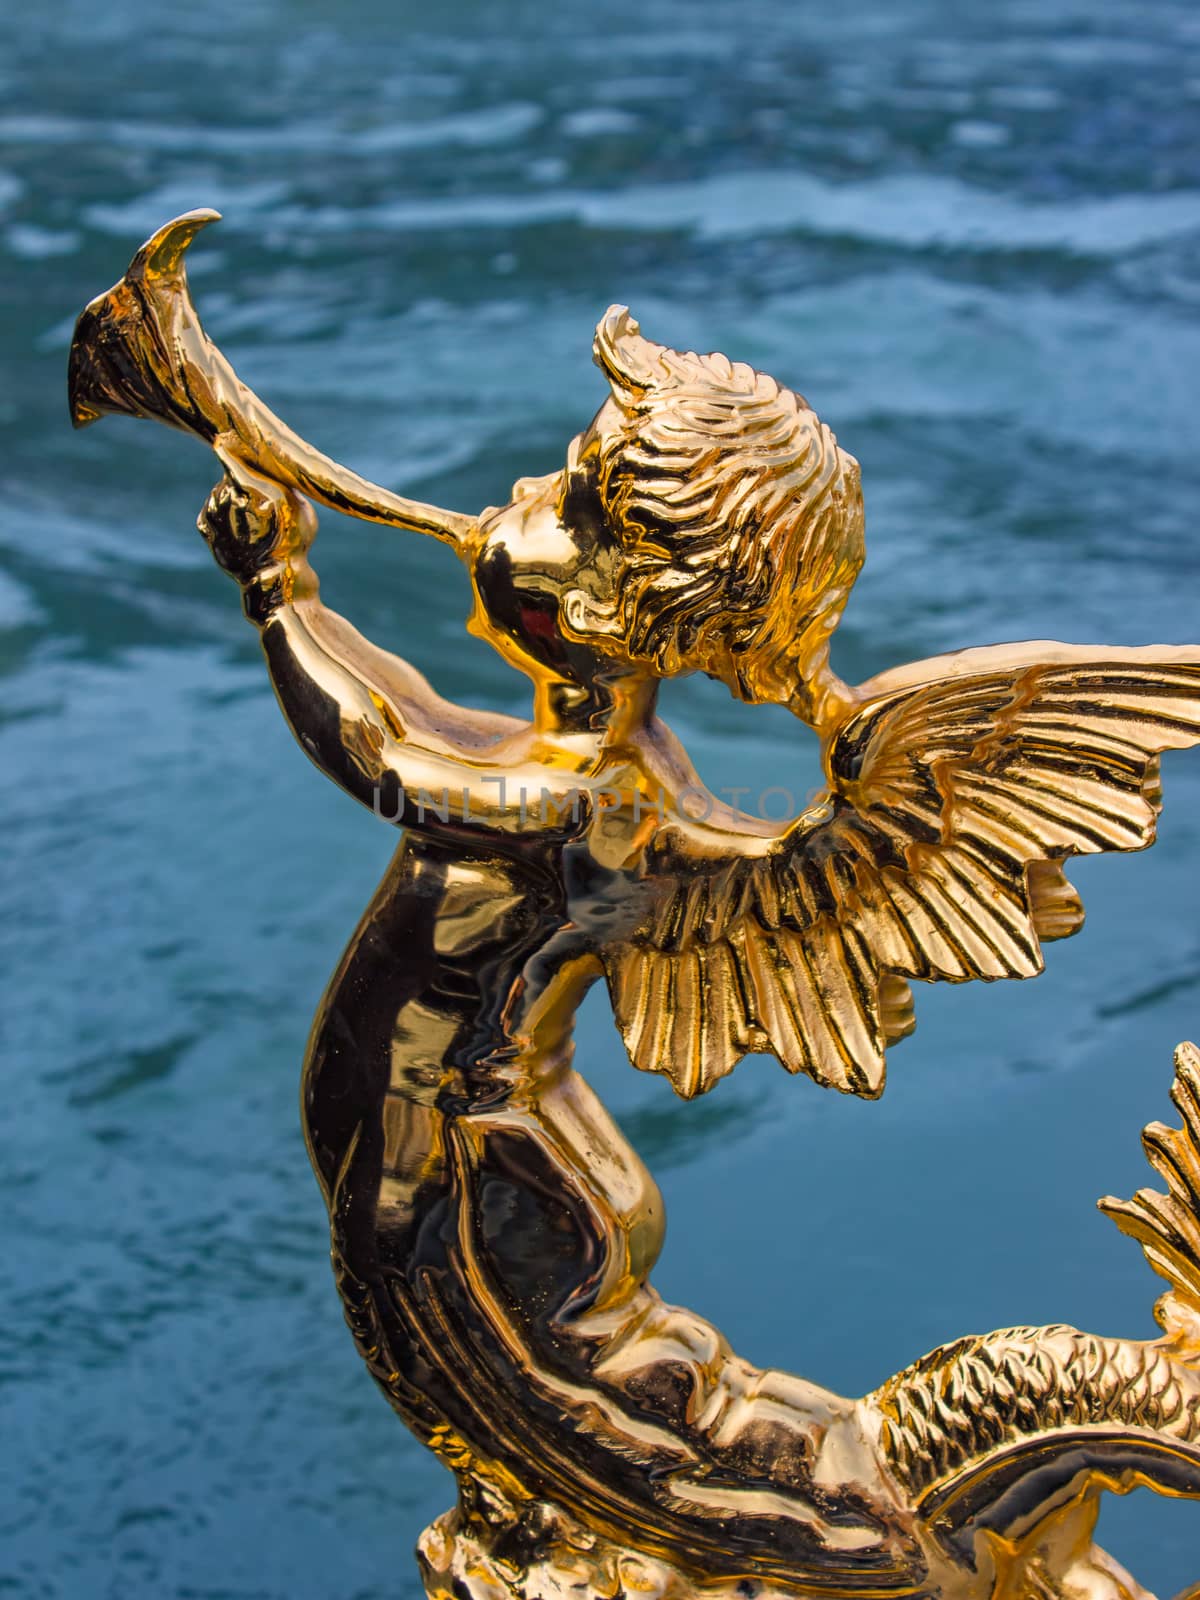 Gold figure of an angel on a gondola. Traditional symbol of Italy on gondola, made by golden statue as a shape of singing angel. Gold figurine angel as part of the gondola decor in Venice, Italy.